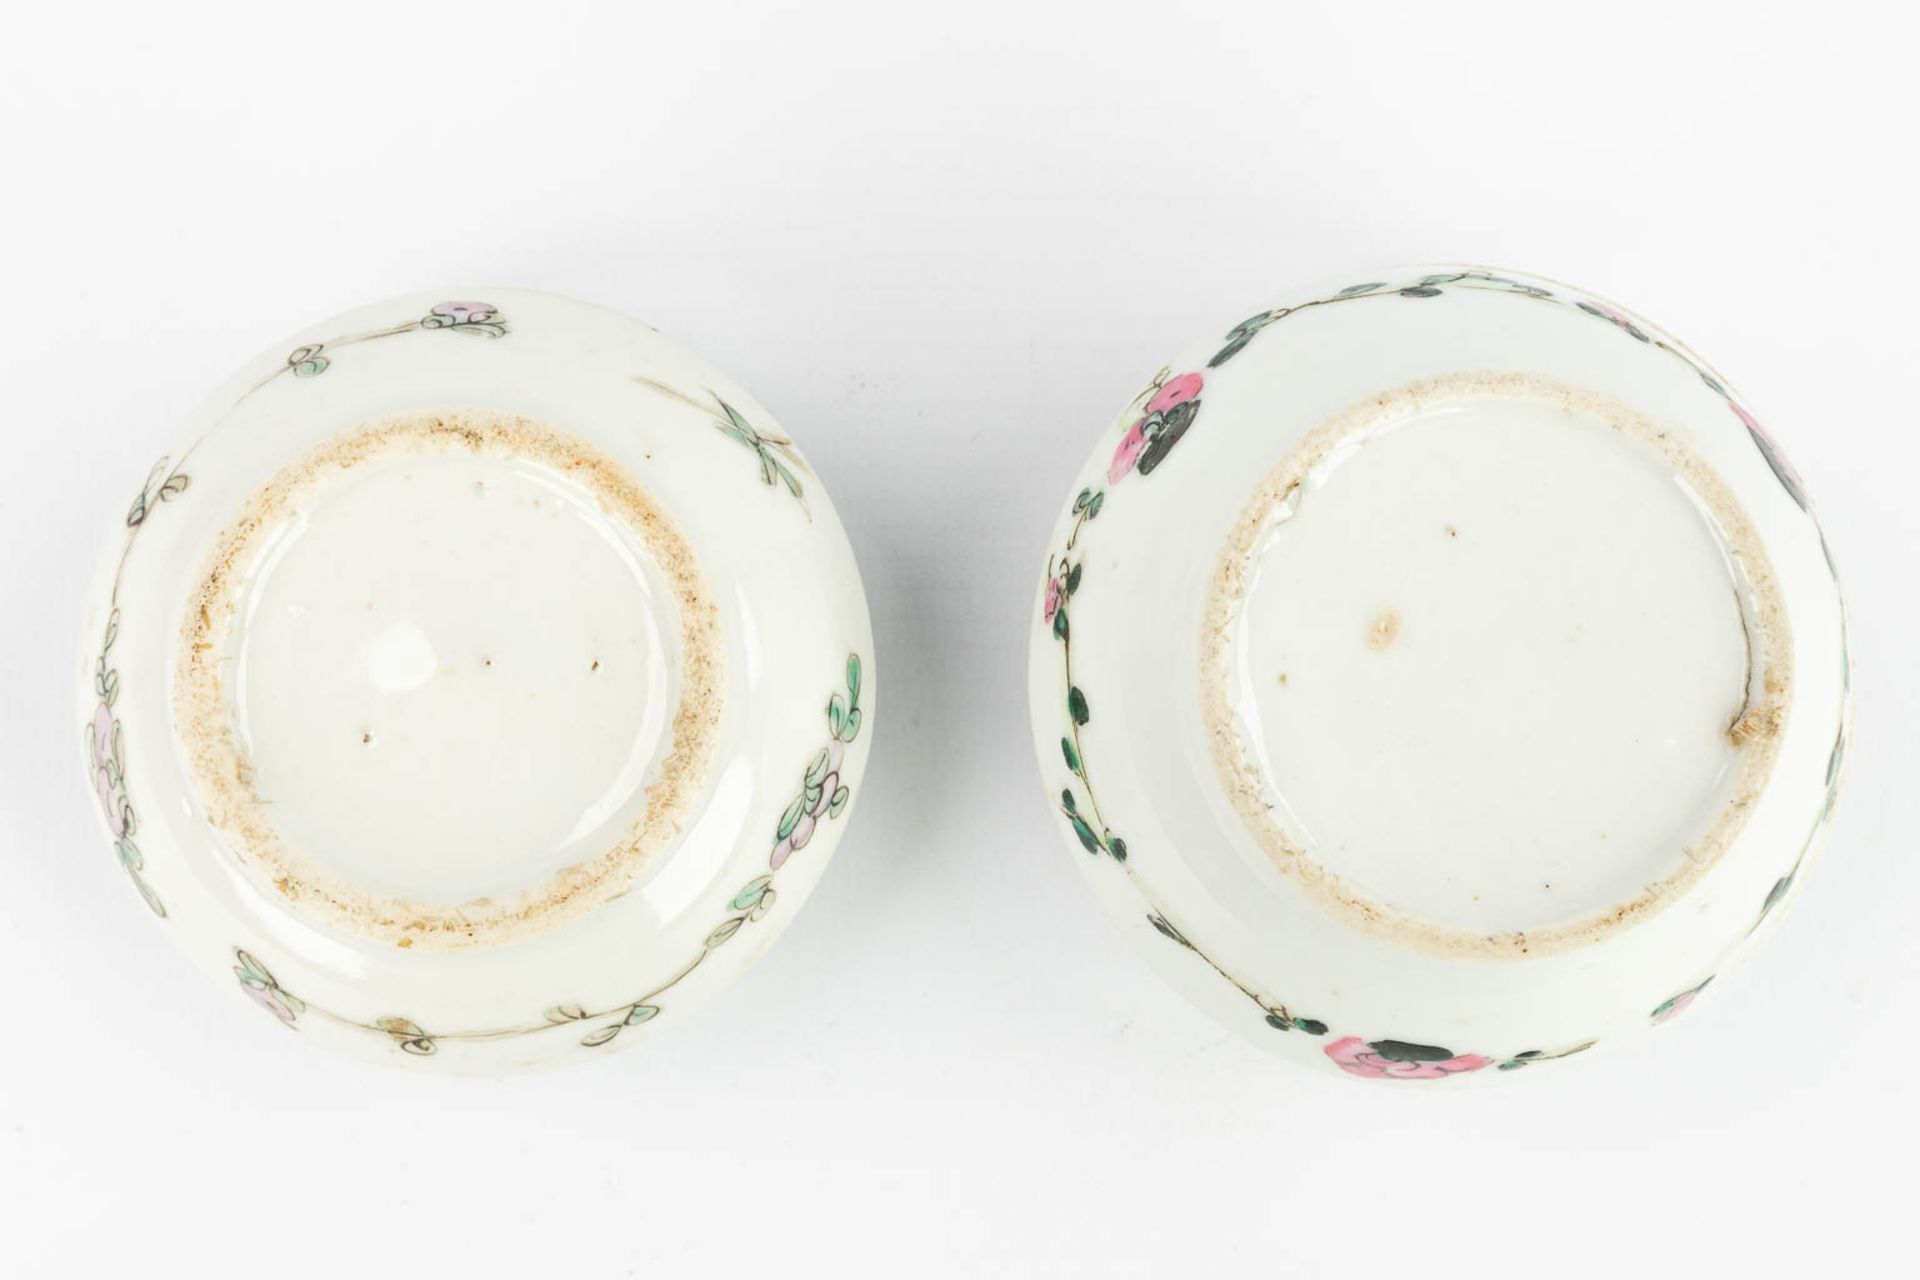 AÊset of 2 Chinese pots with lid, with hand-painted decor and made of porcelain (5 x 8,5 cm) - Image 5 of 18